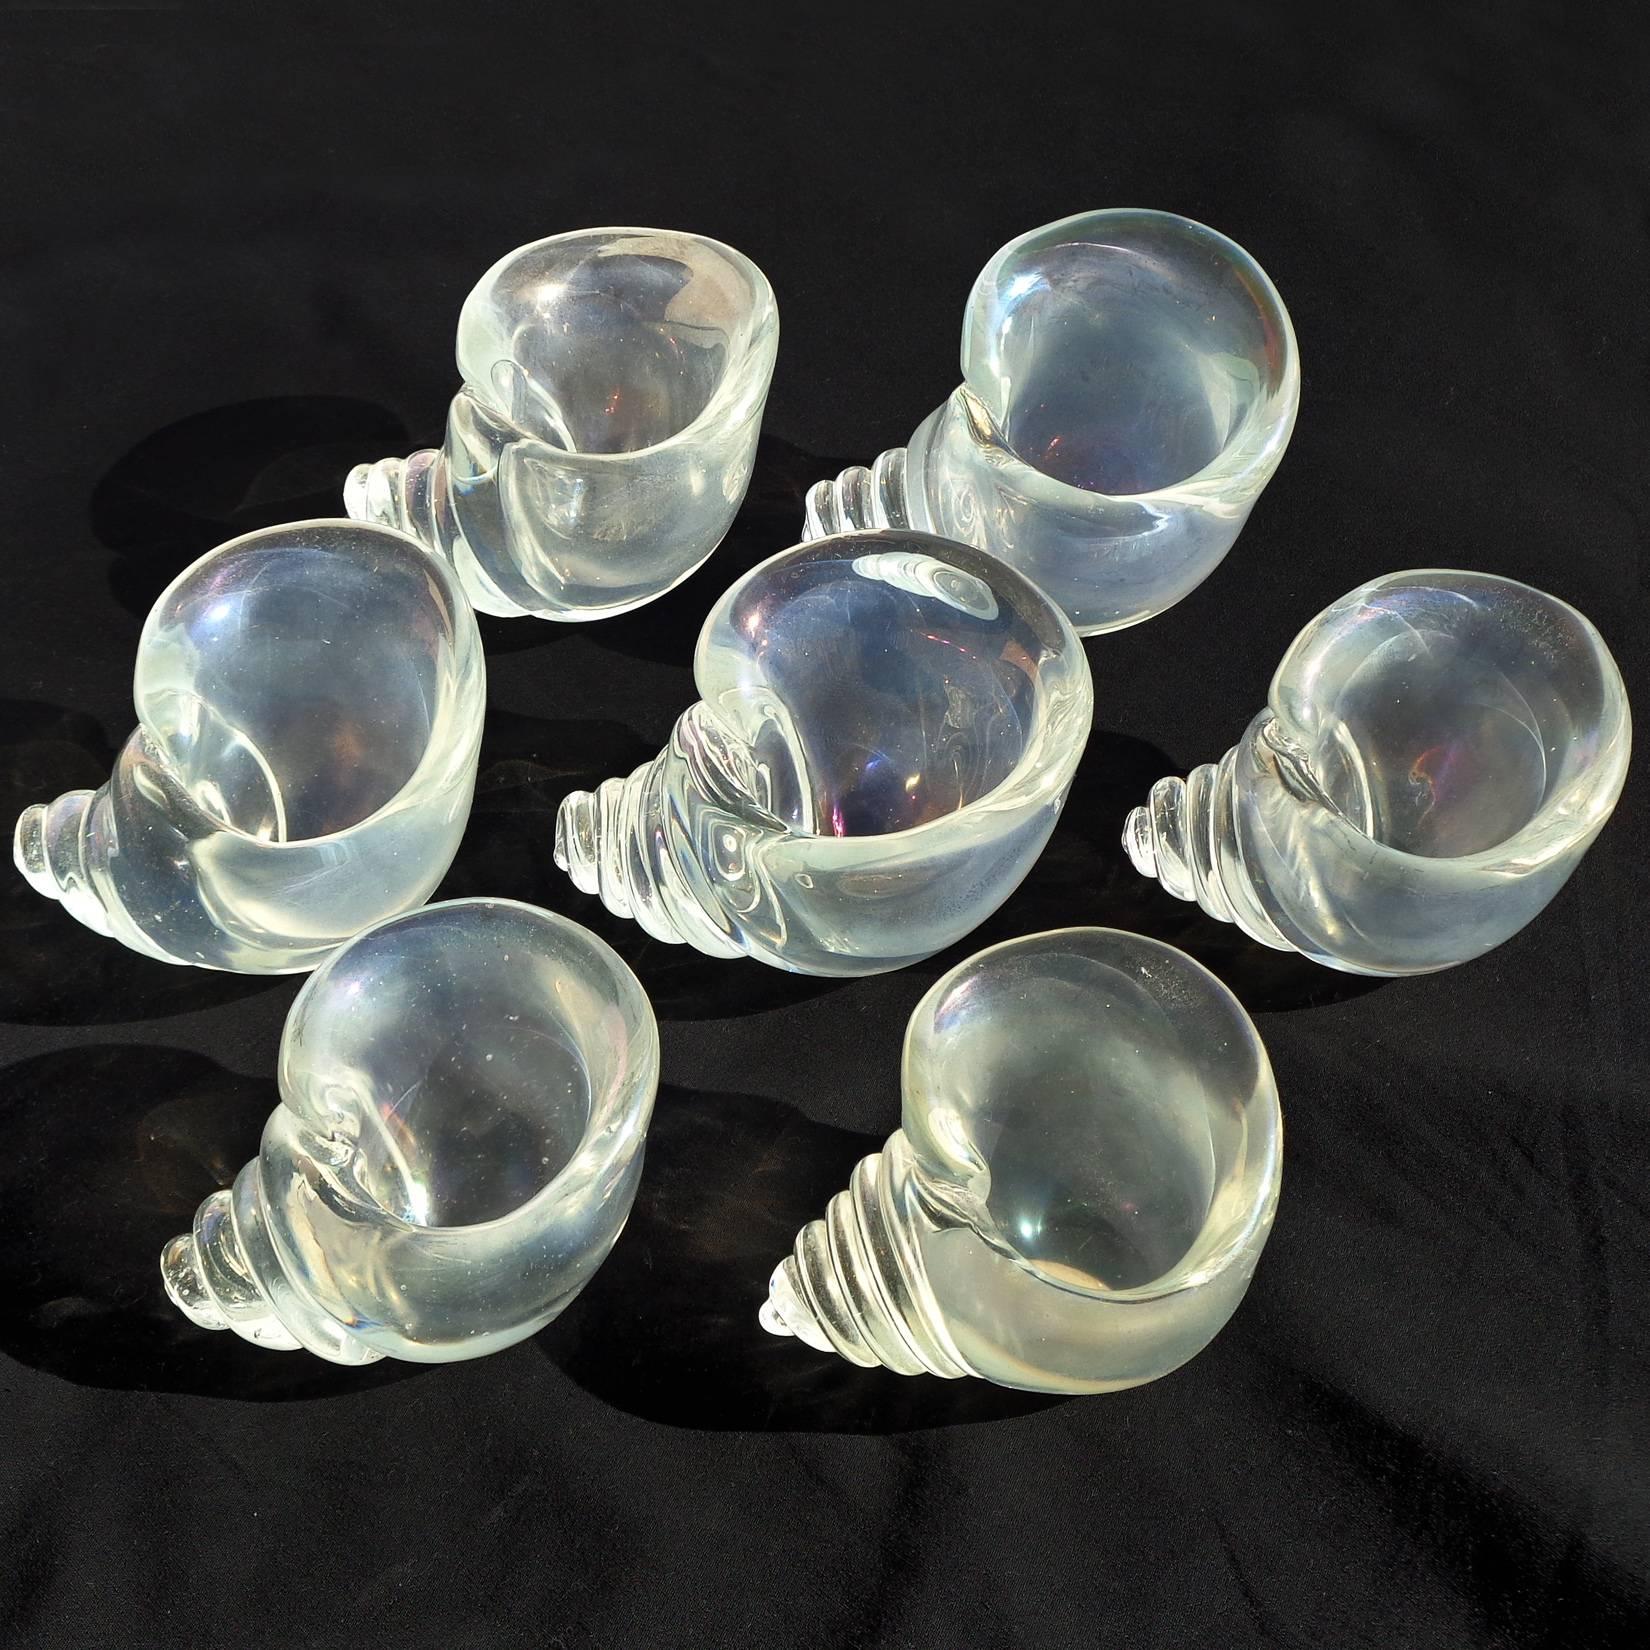 Please note, priced per item (7 available), beautiful vintage Murano hand blown iridescent art glass seashells. Documented to designer Flavio Poli for the Seguso Vetri d'Arte company. Measurements, shapes and amount of iridescence varies on each